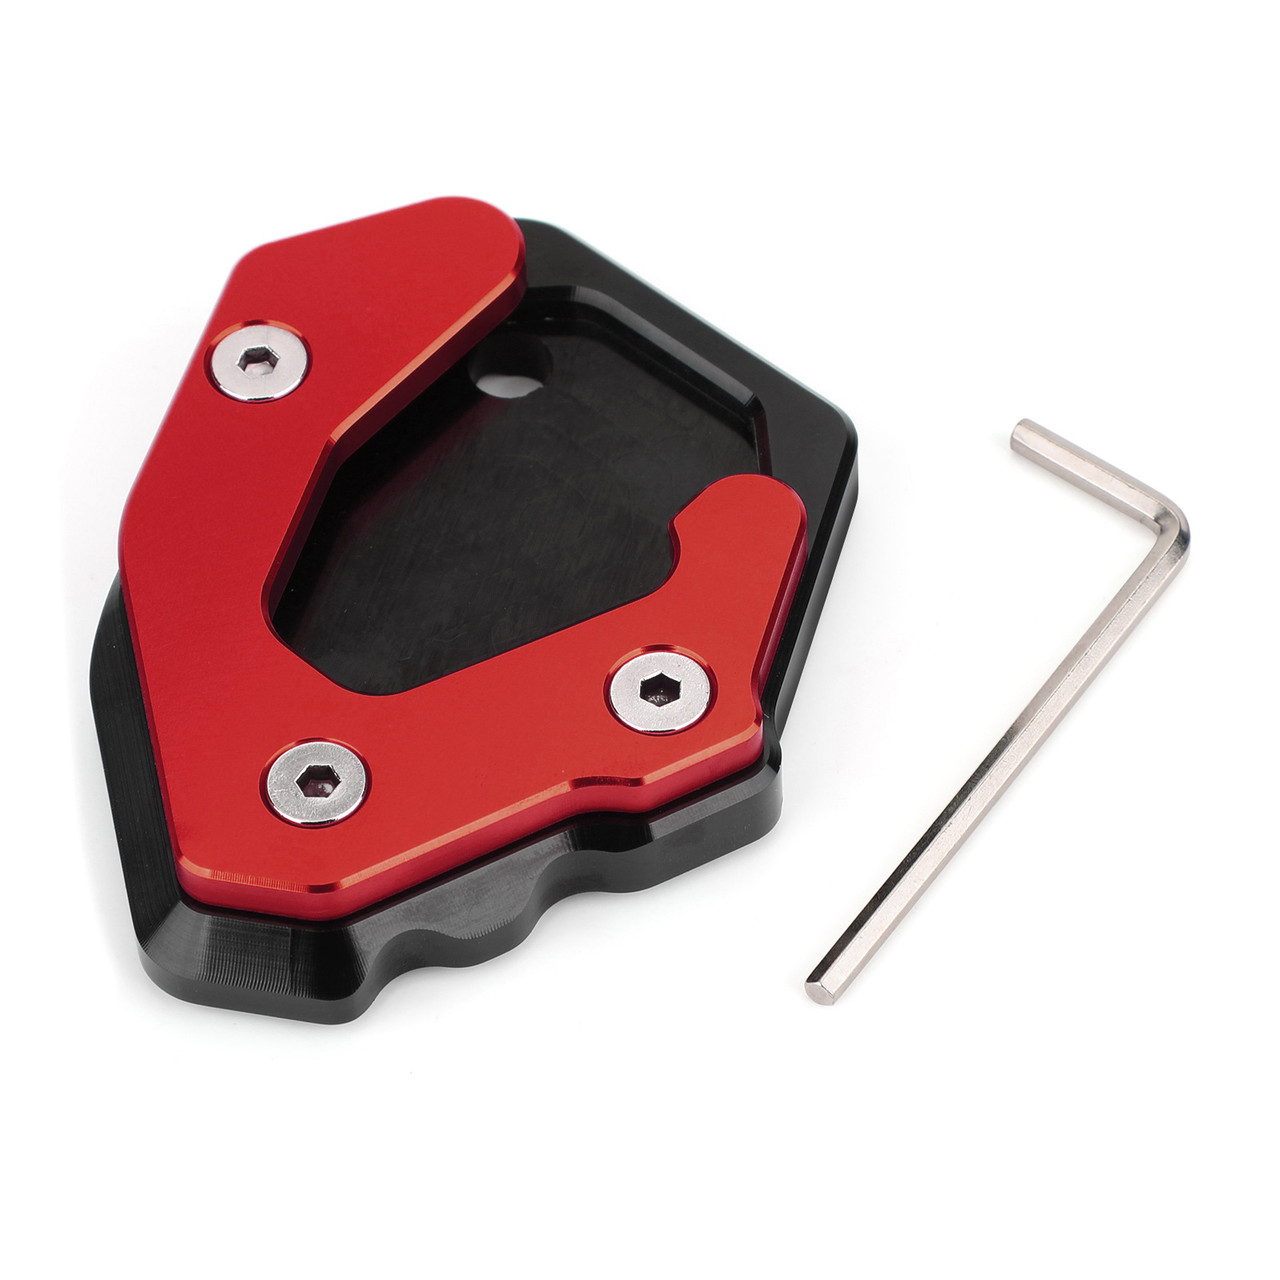 Kickstand Side Stand Extension Plate For Benelli Leoncino 500 BJ250 TNT25 BJ300 Red